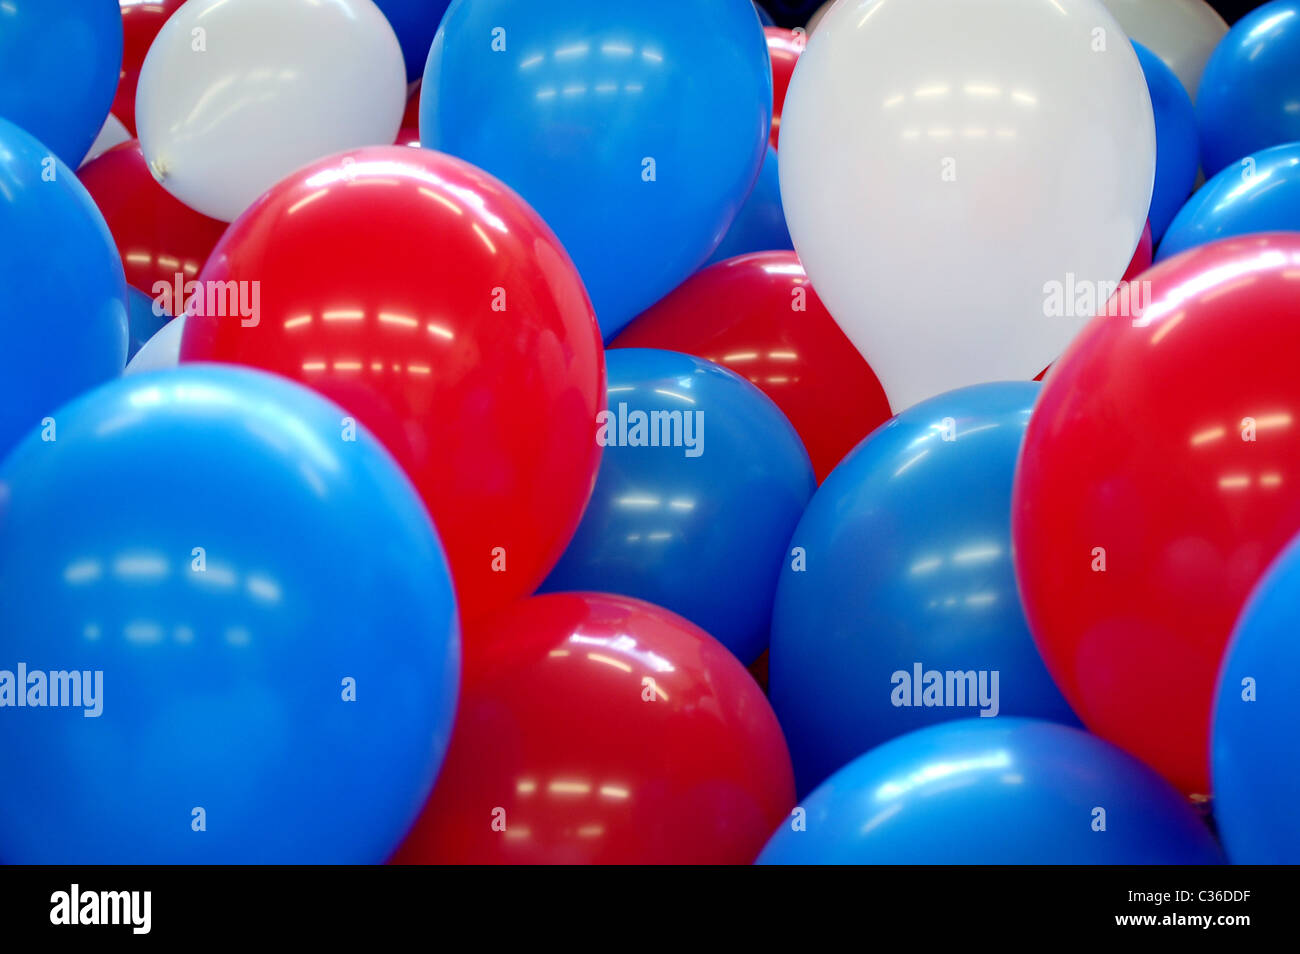 Red, white and blue balloons Stock Photo